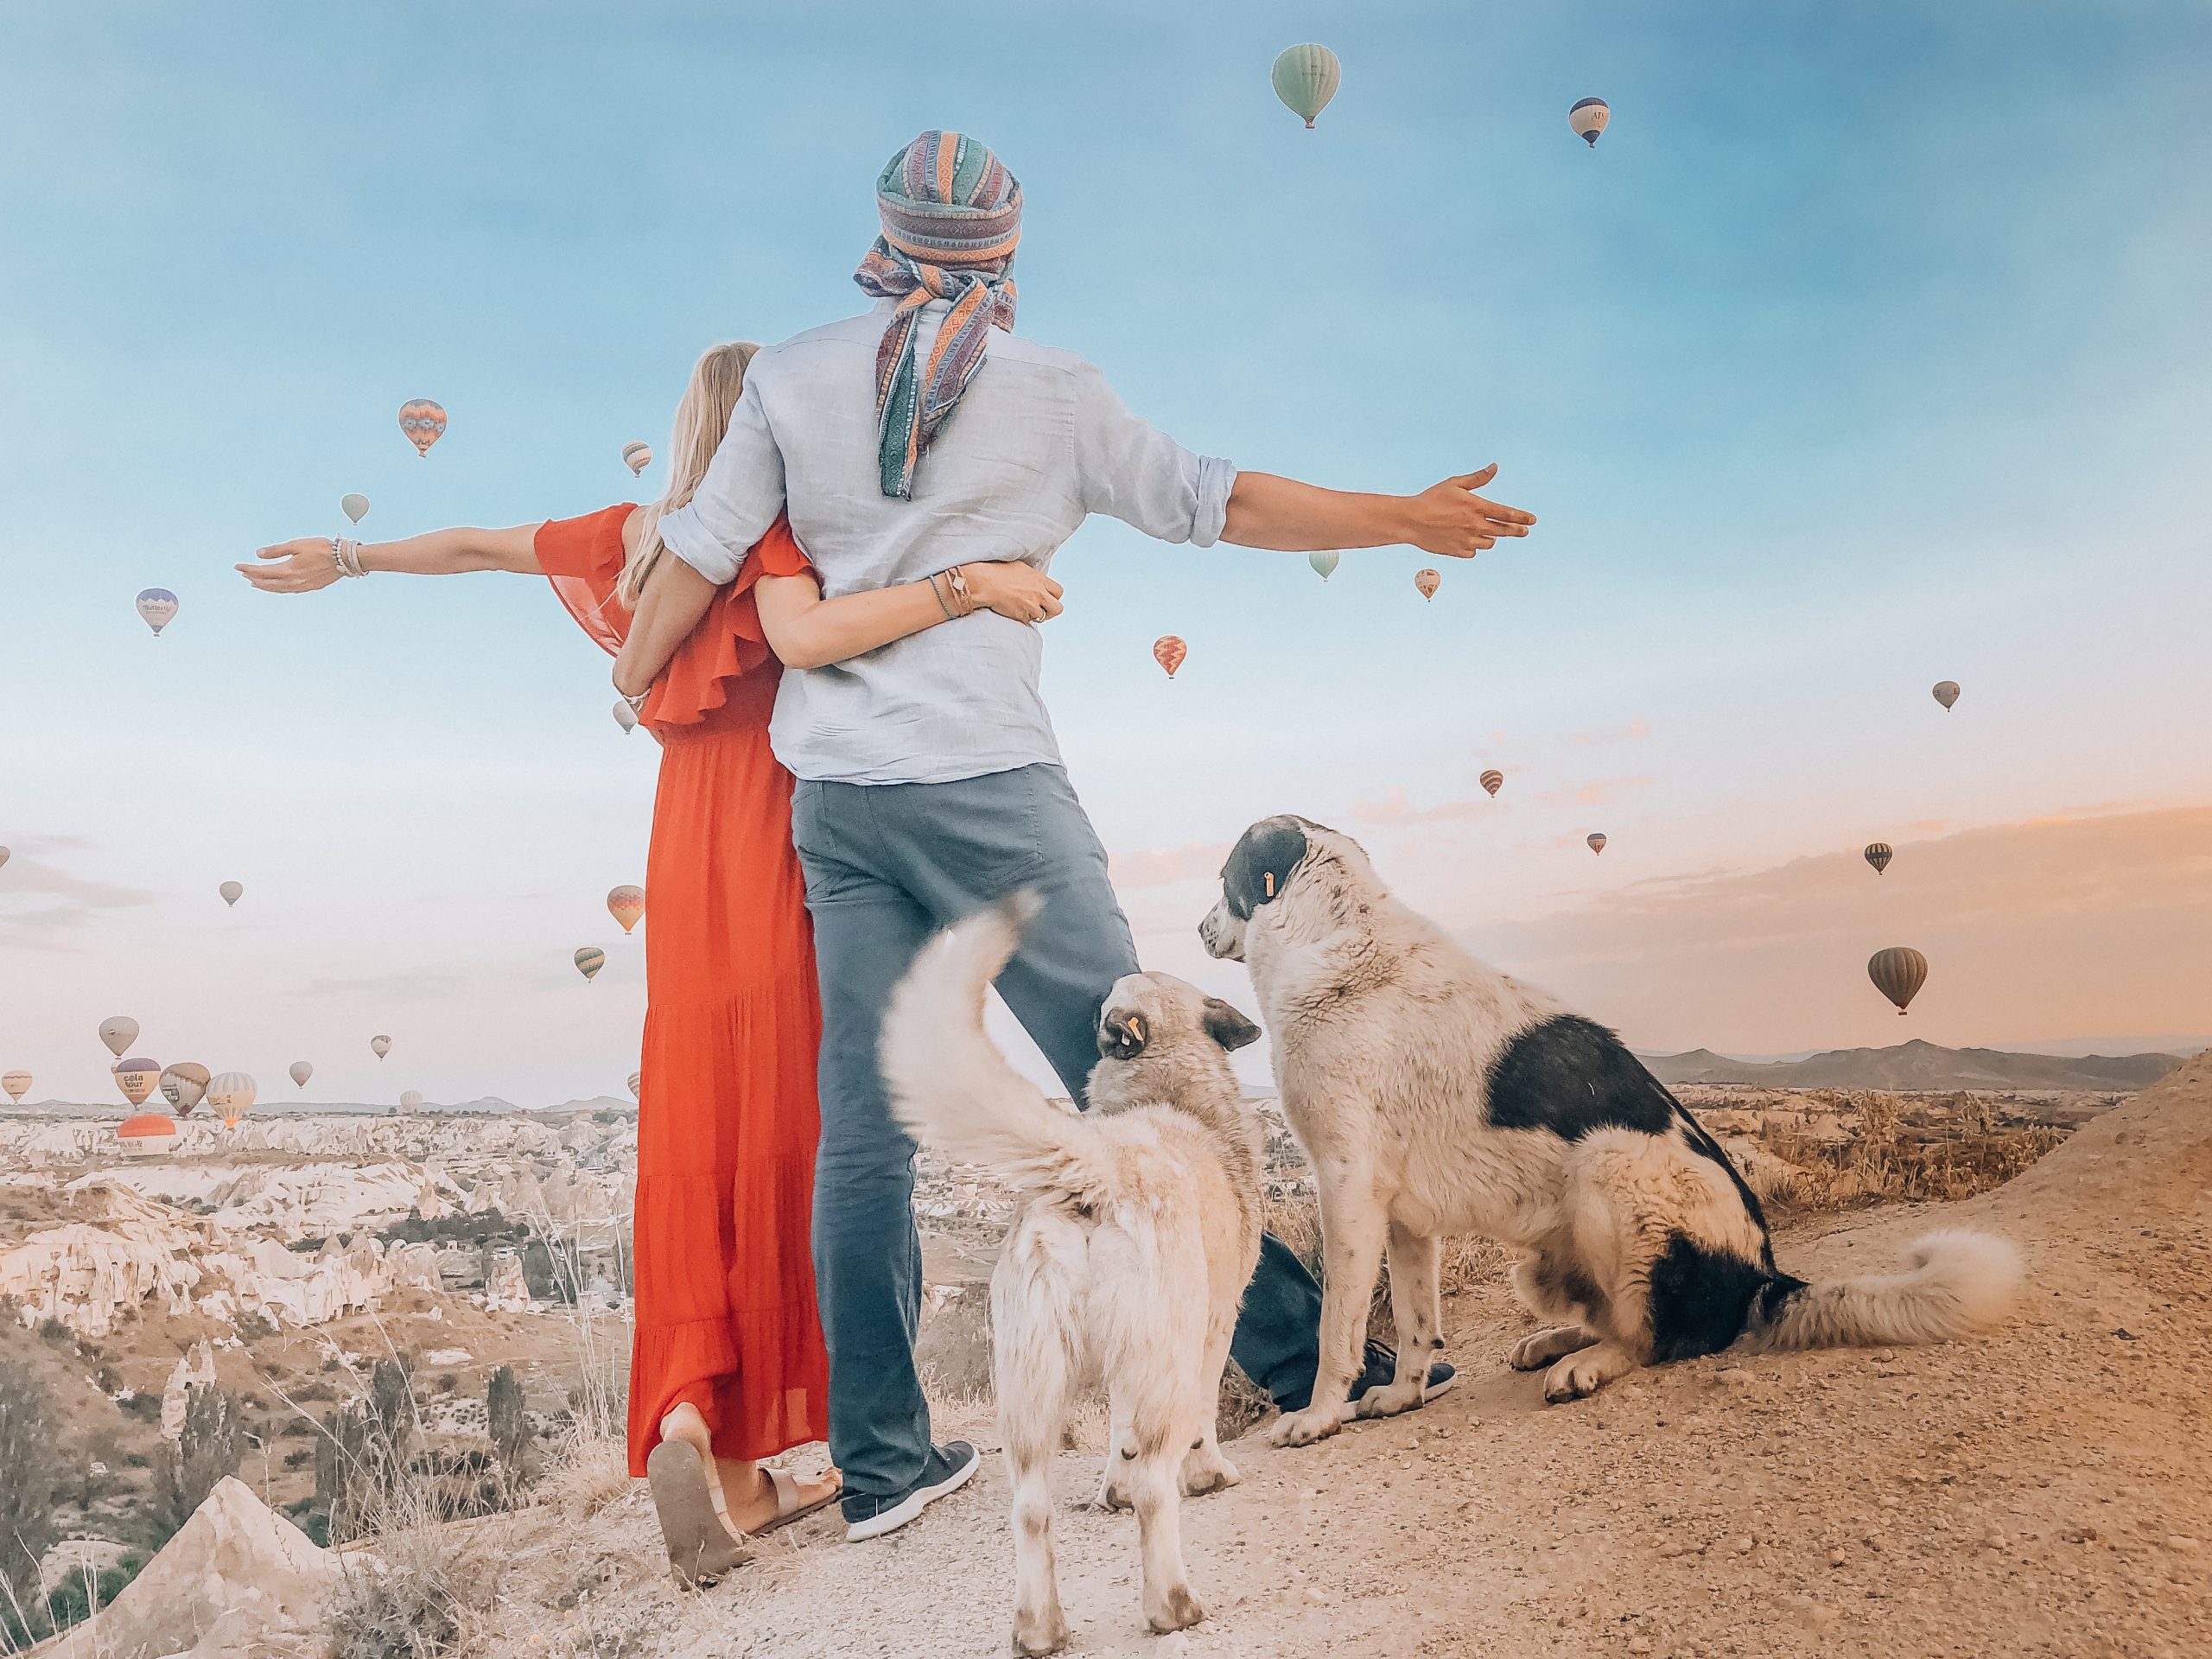 Two people and their dogs watch hot air balloons fly